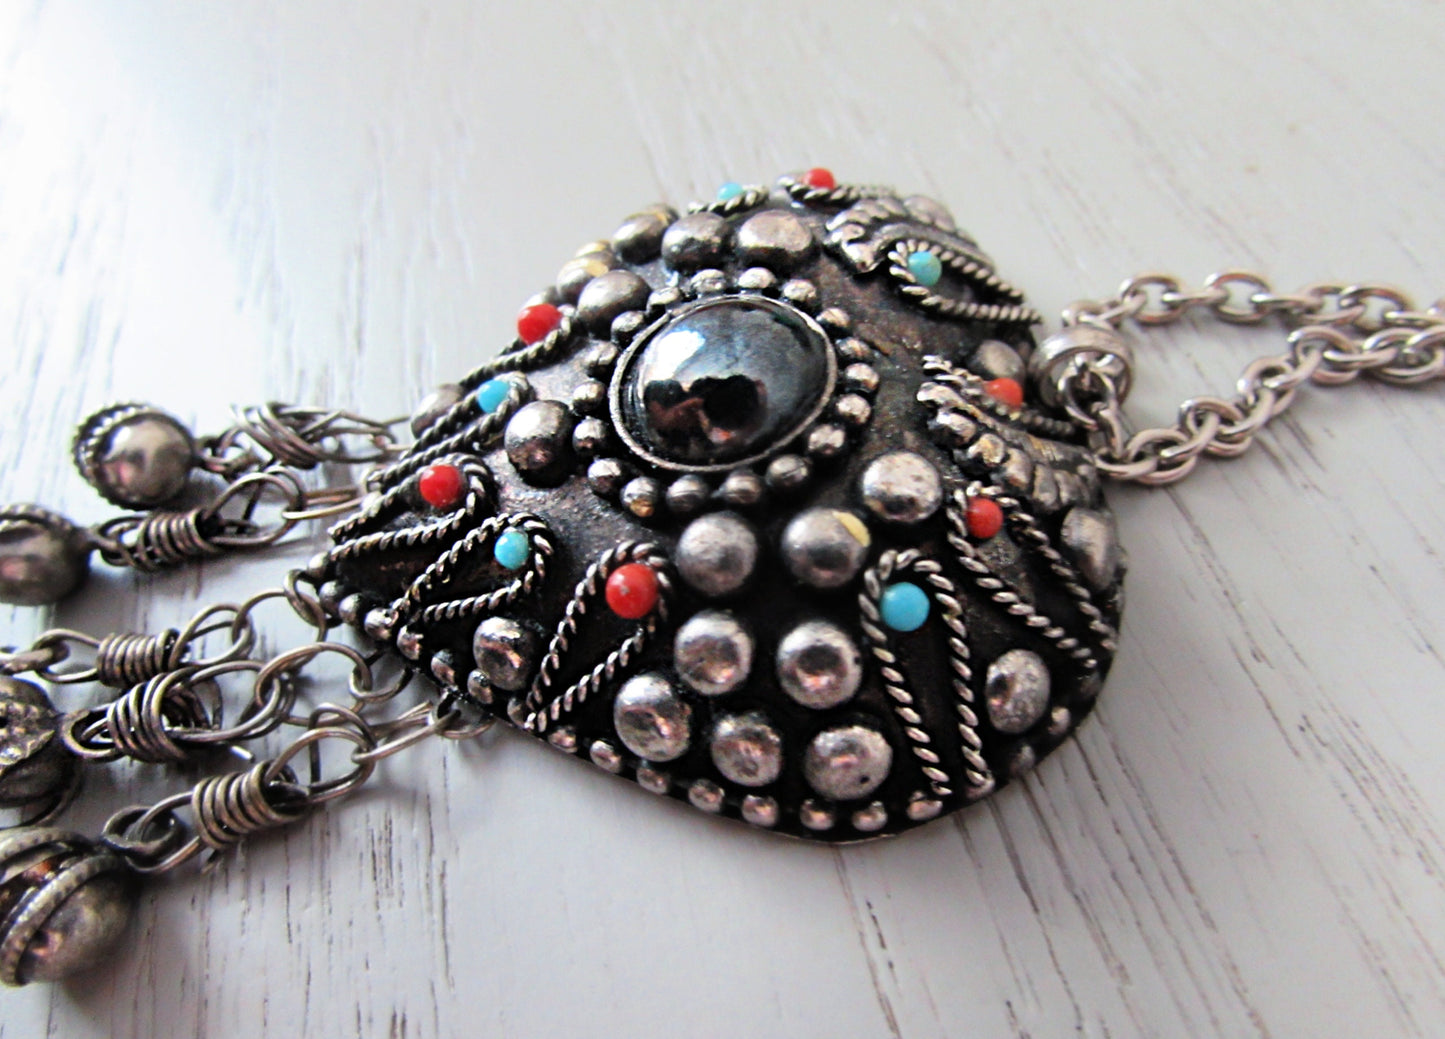 Boho Heart Pendant Necklace, 1970s Vintage Gunmetal Heart Charm Necklace w Red and Blue Beading, Long Tassel Charm Bohemian Chain Necklace